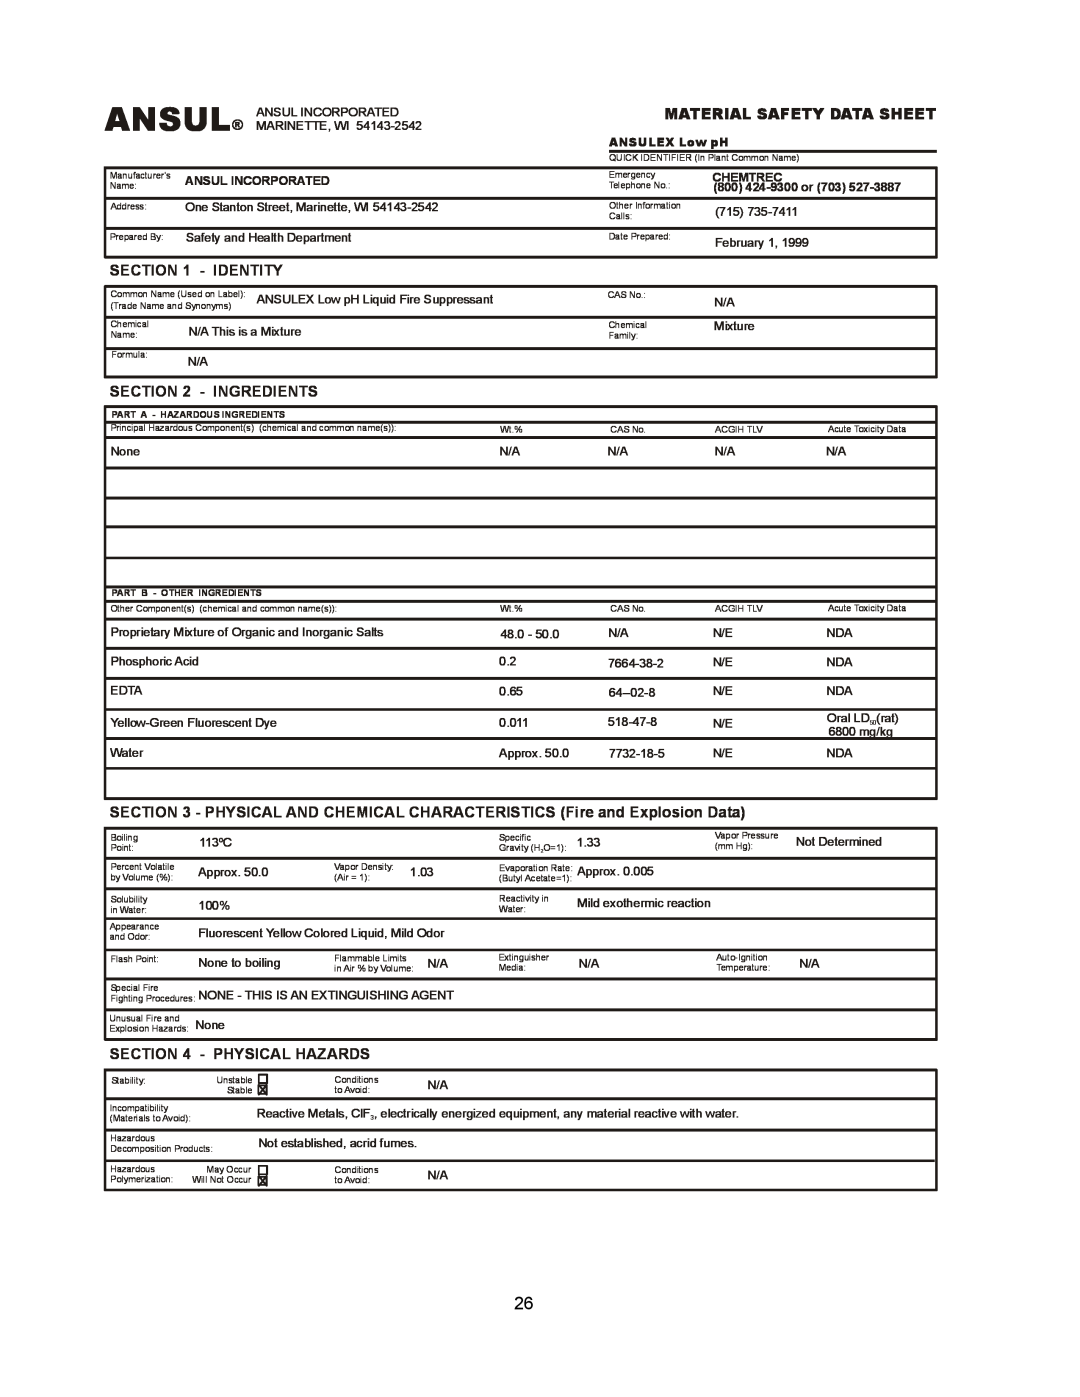 Bloomfield WVOC-2HSG Ansul, Identity, Ingredients, Physical Hazards, Material Safety Data Sheet, ANSULEX Low pH, Chemtrec 